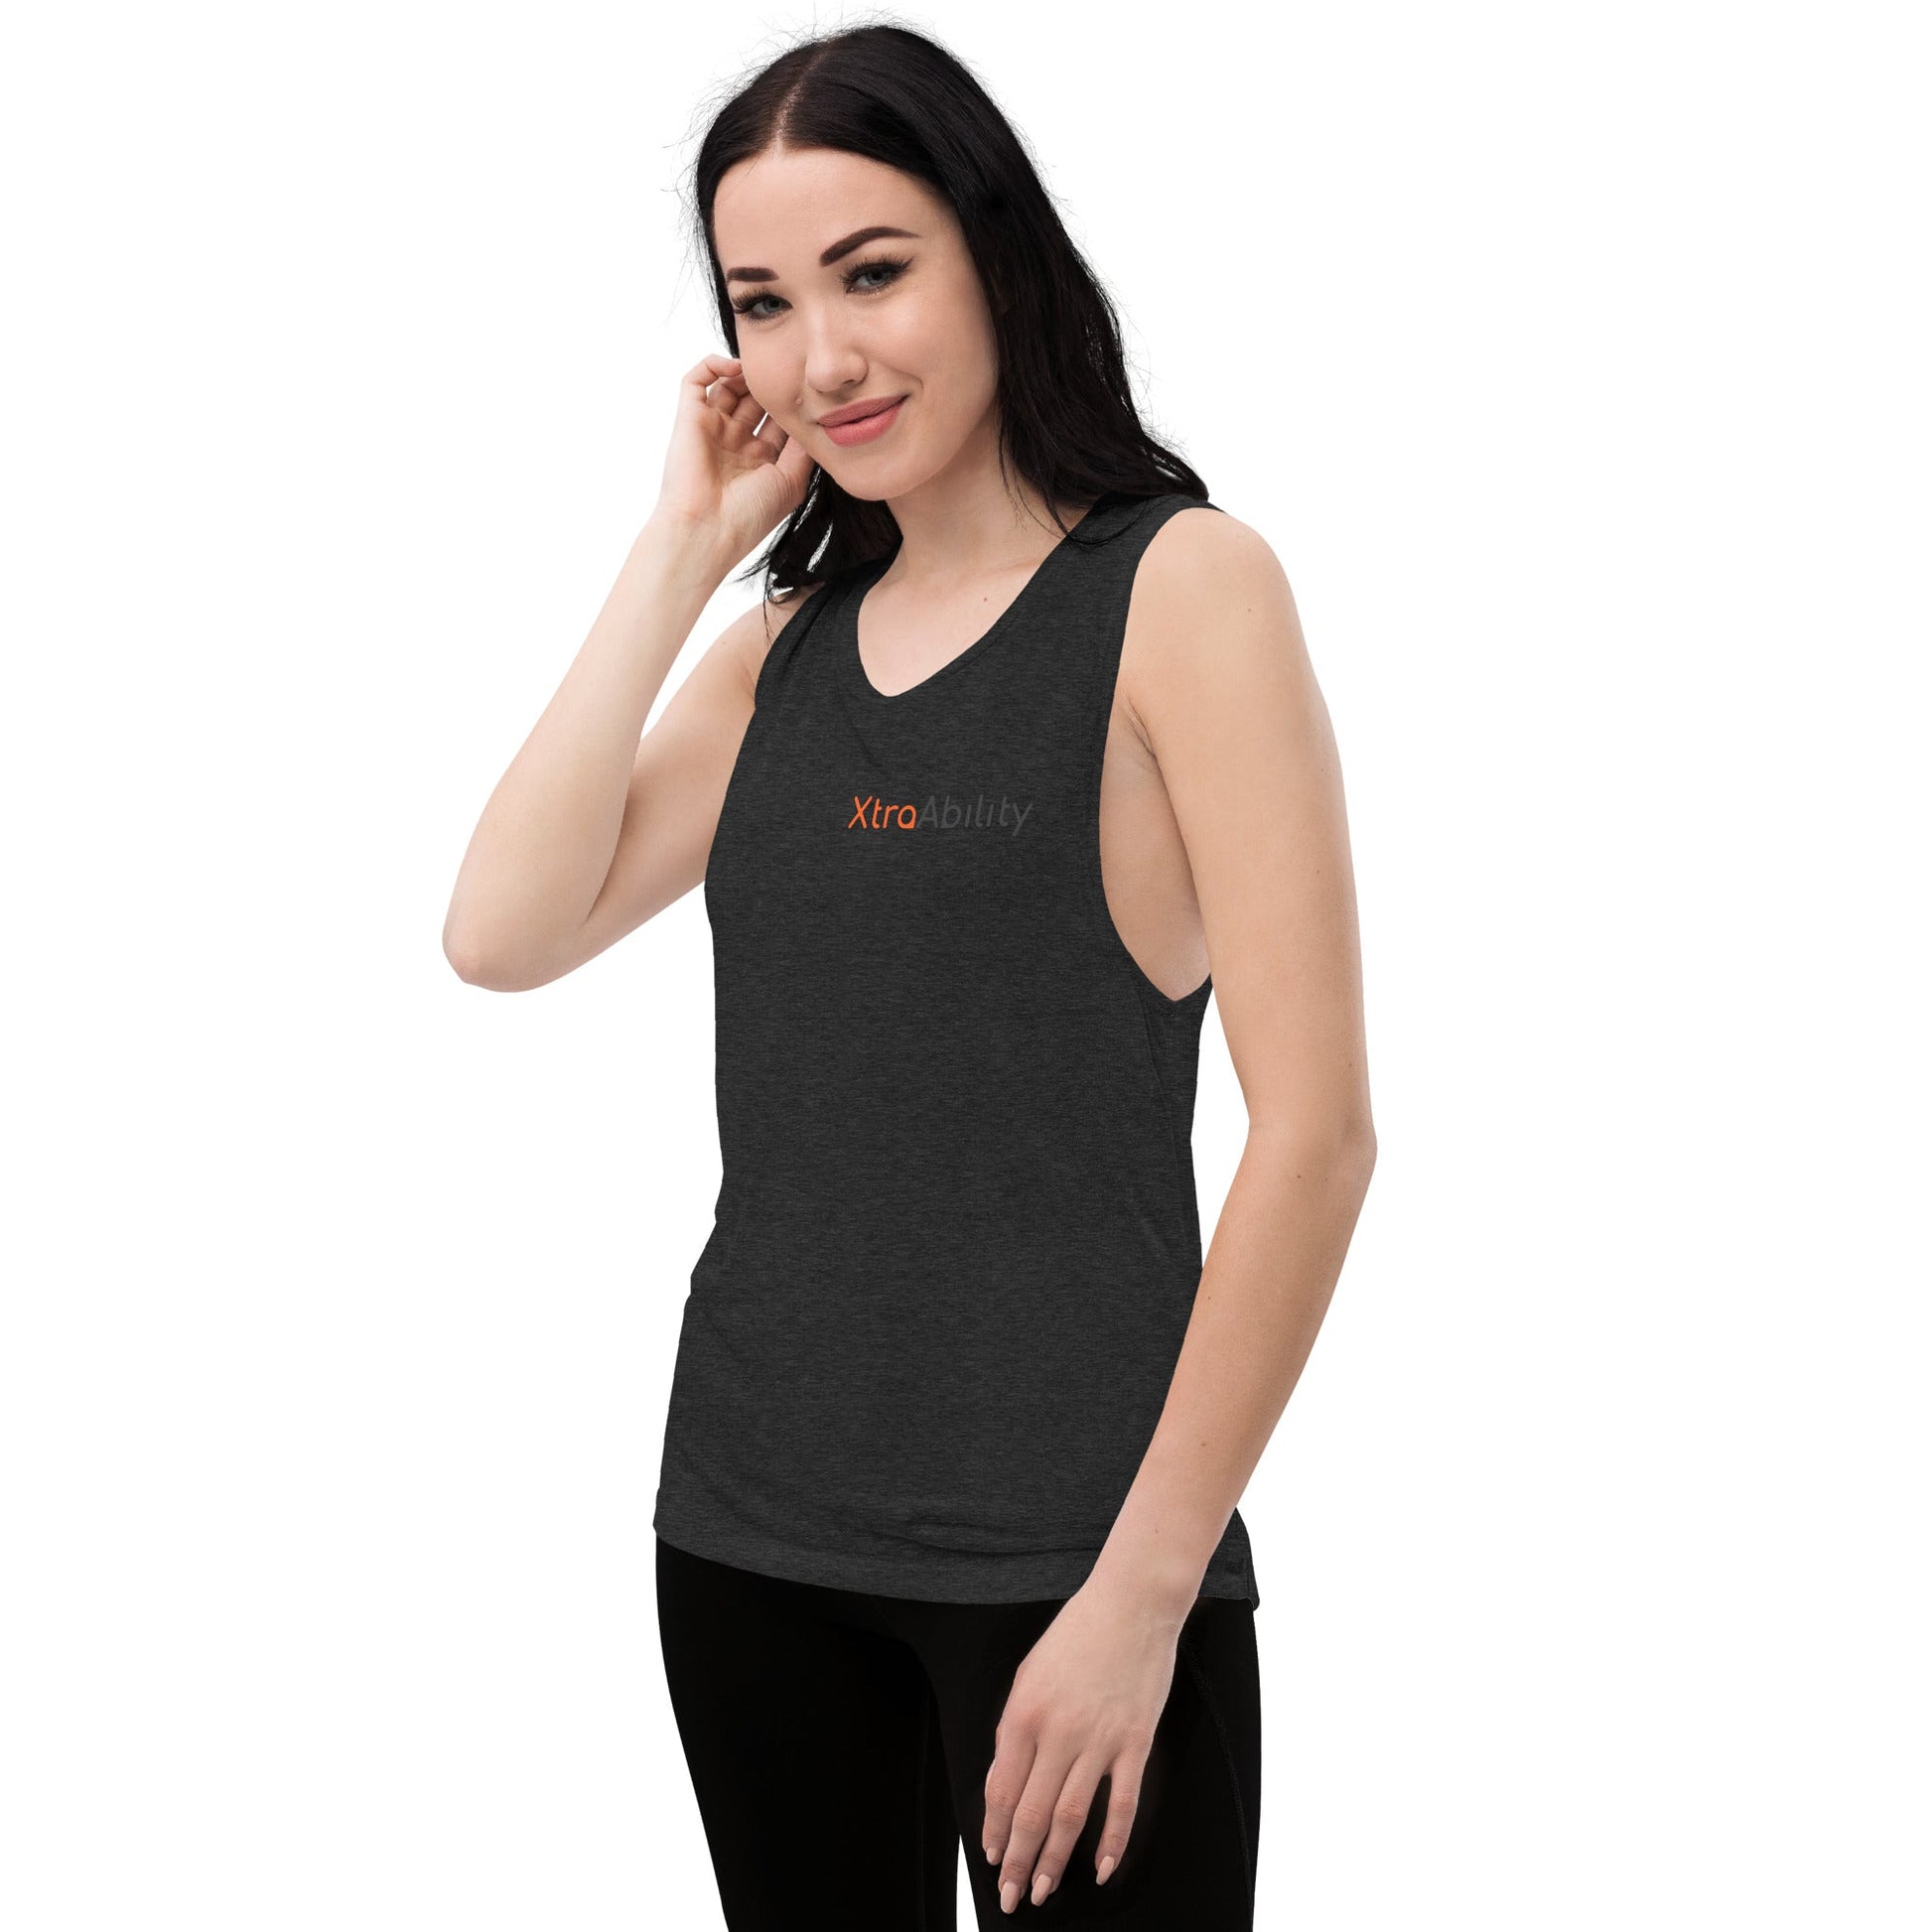 Women's Muscle Tanks: Versatile and Stylish Tops for Active Lifestyles